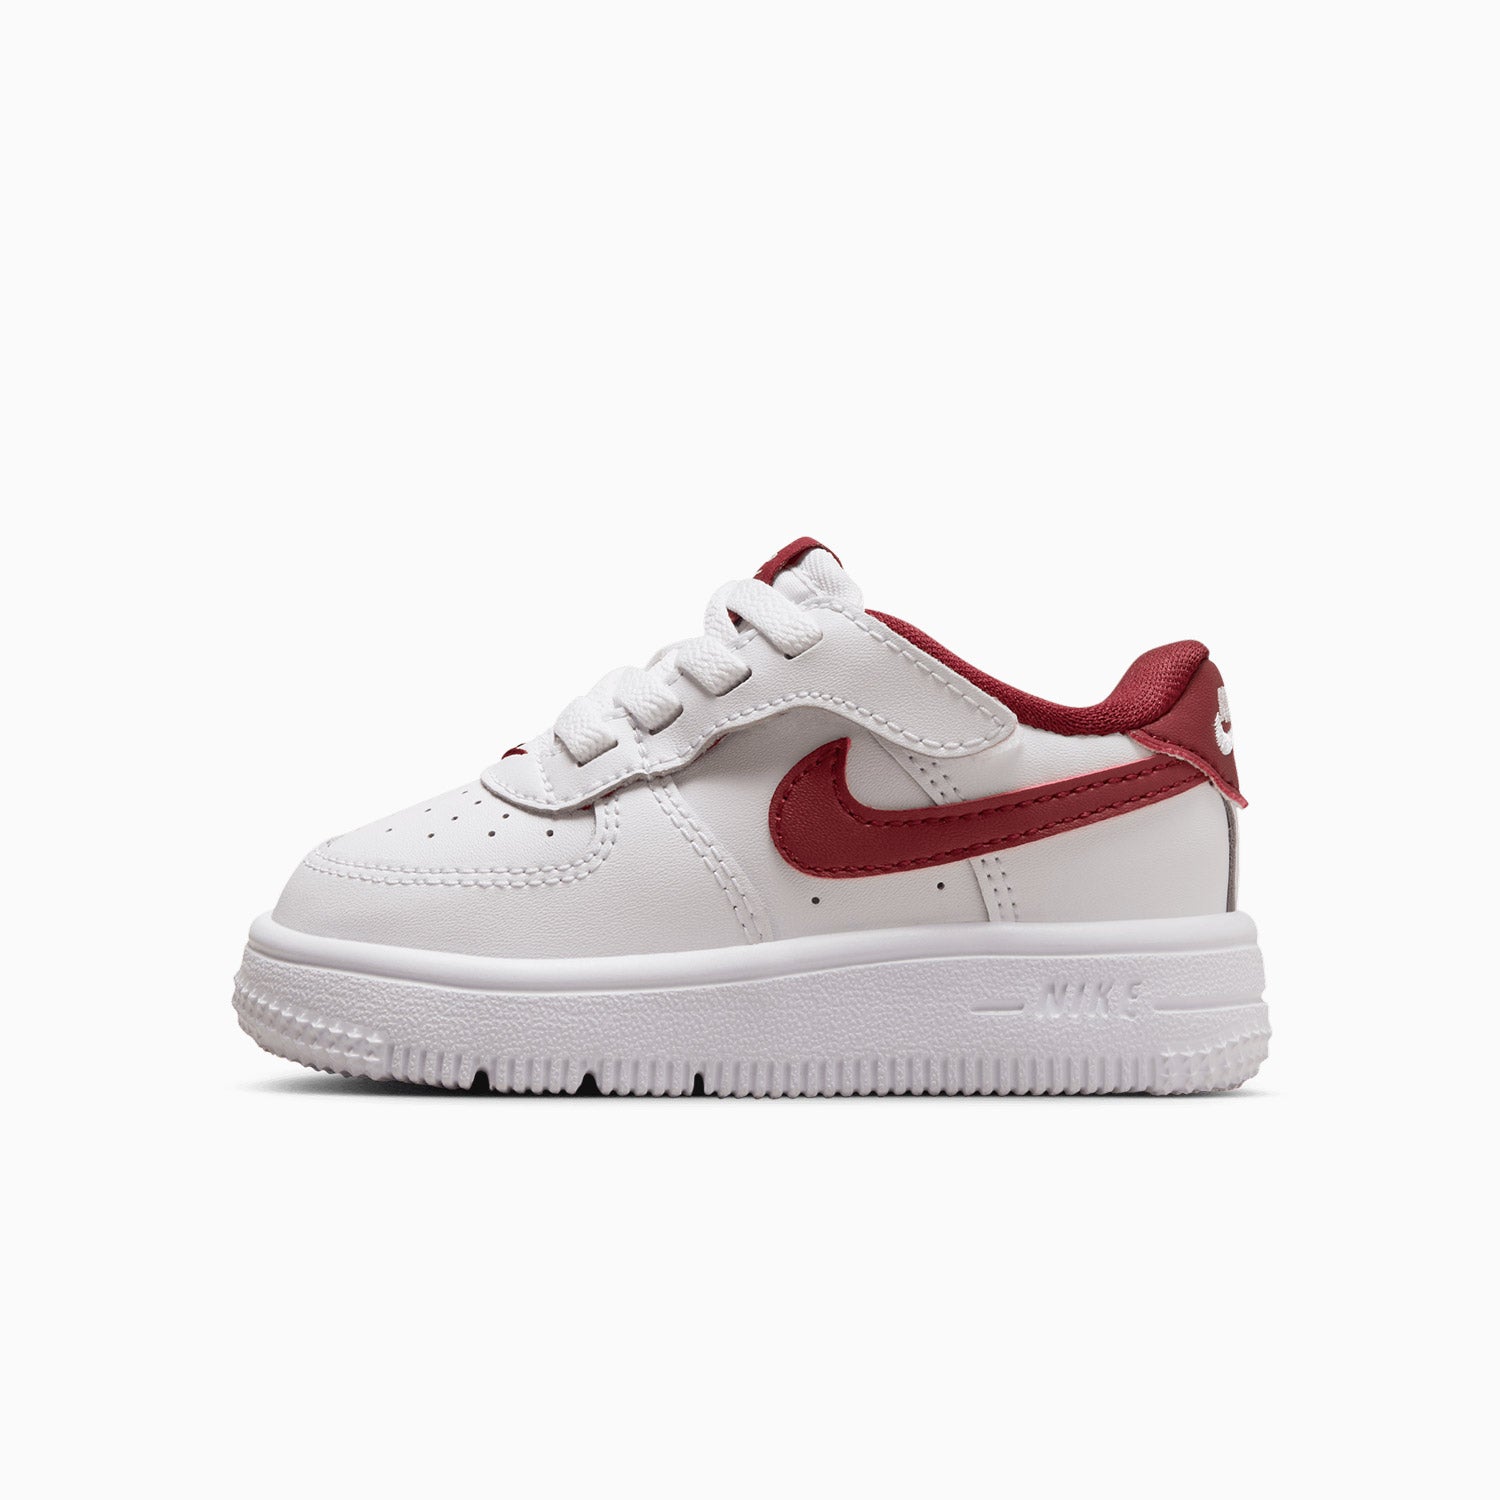 nike-kids-air-force-1-low-easyon-white-red-toddlers-shoes-fn0236-105